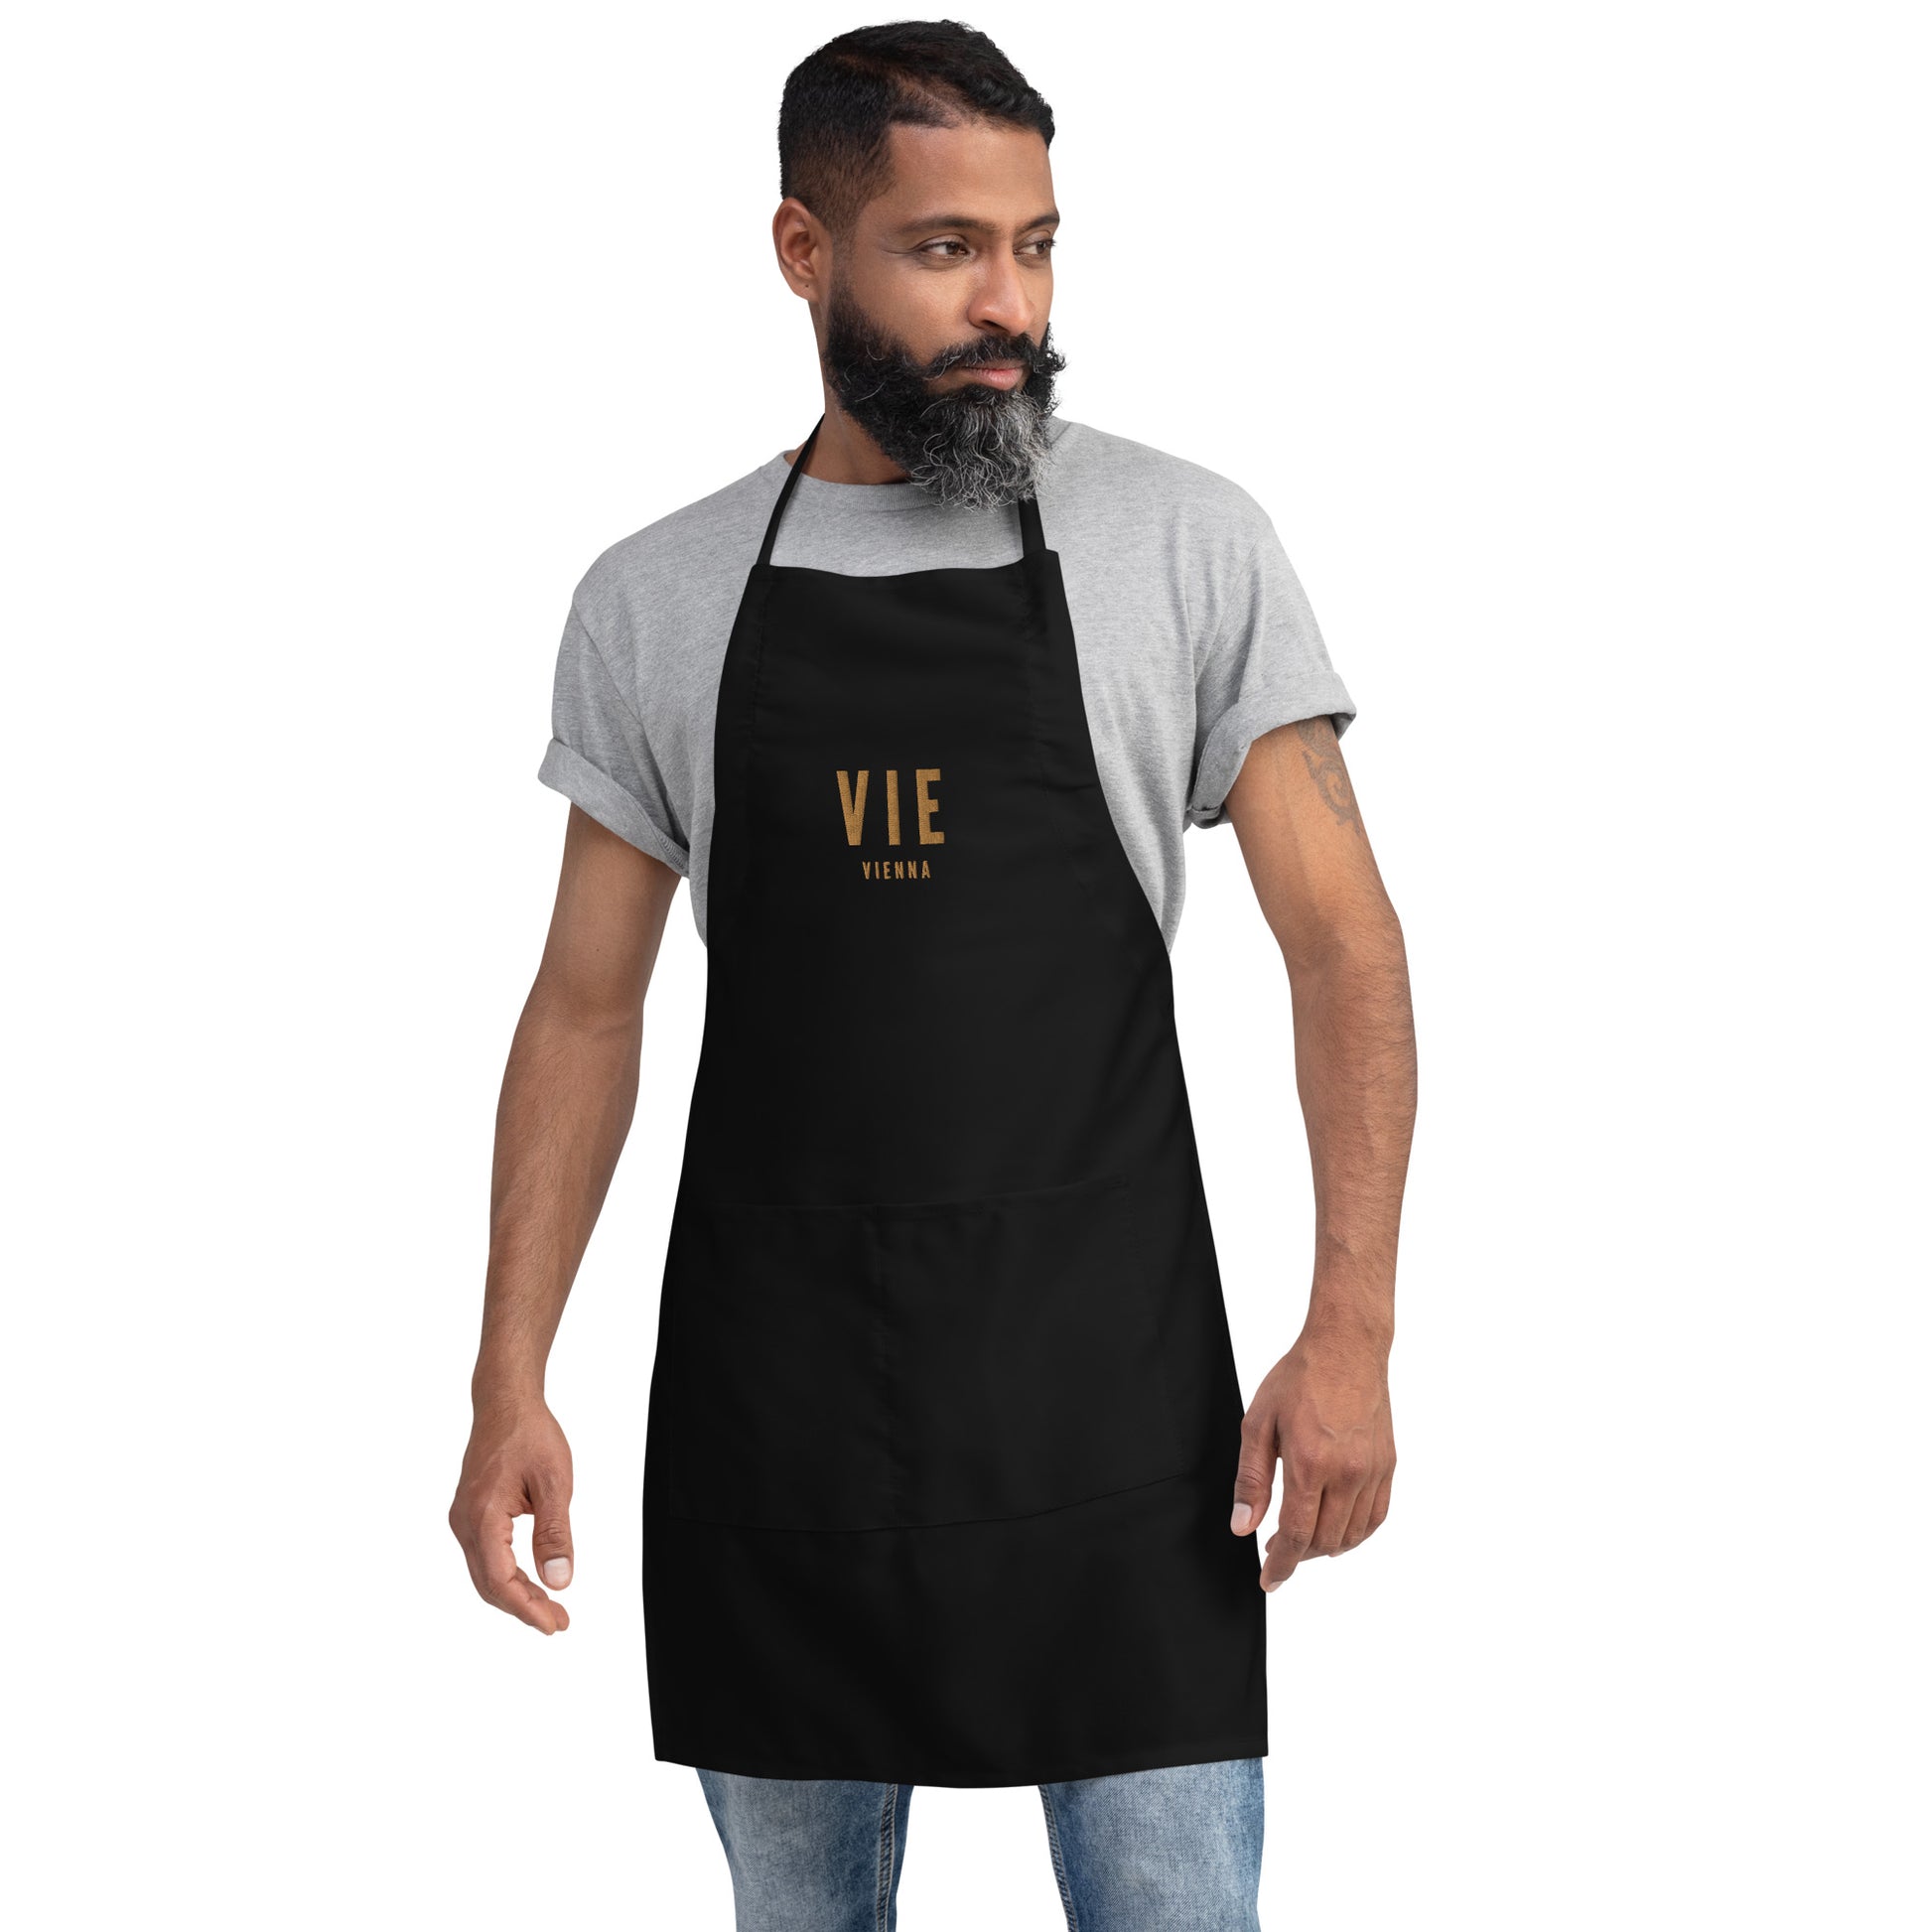 City Embroidered Apron - Old Gold • VIE Vienna • YHM Designs - Image 05